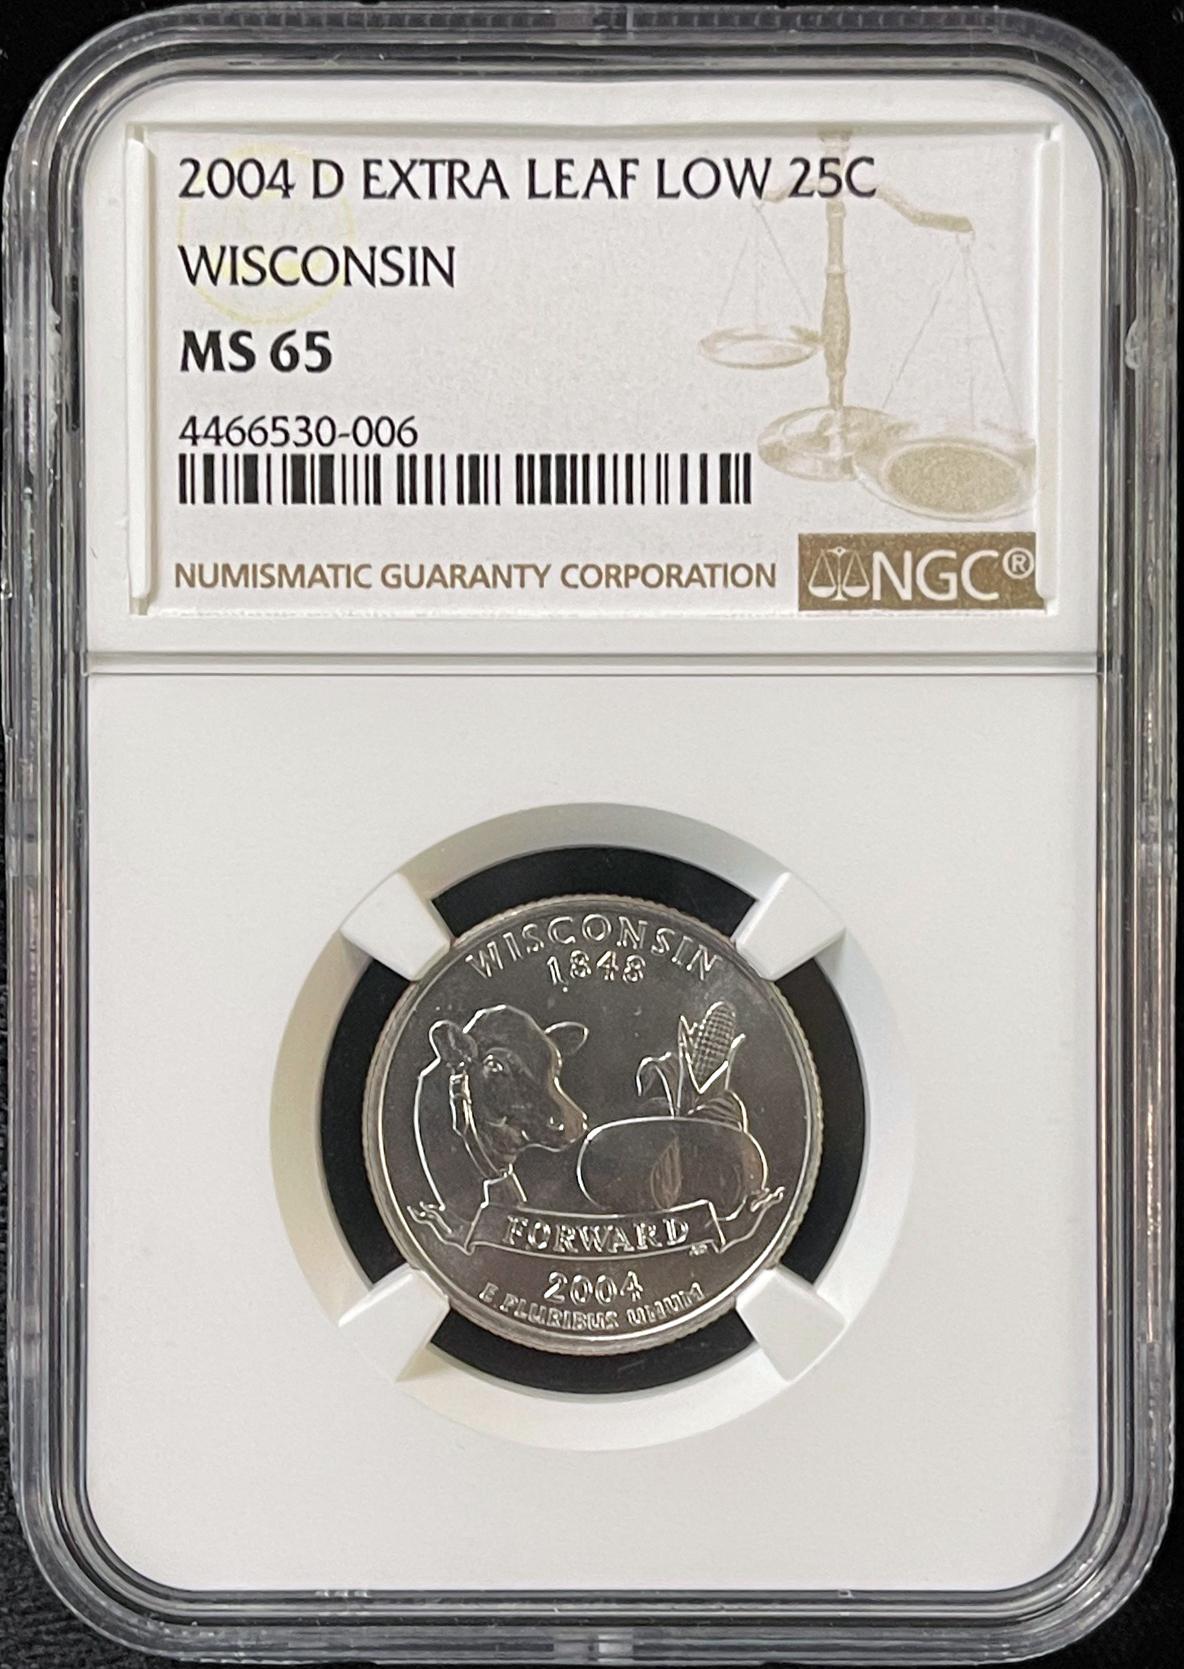 2004-D "Extra Leaf Low" Wisconsin Quarter in NGC MS 65